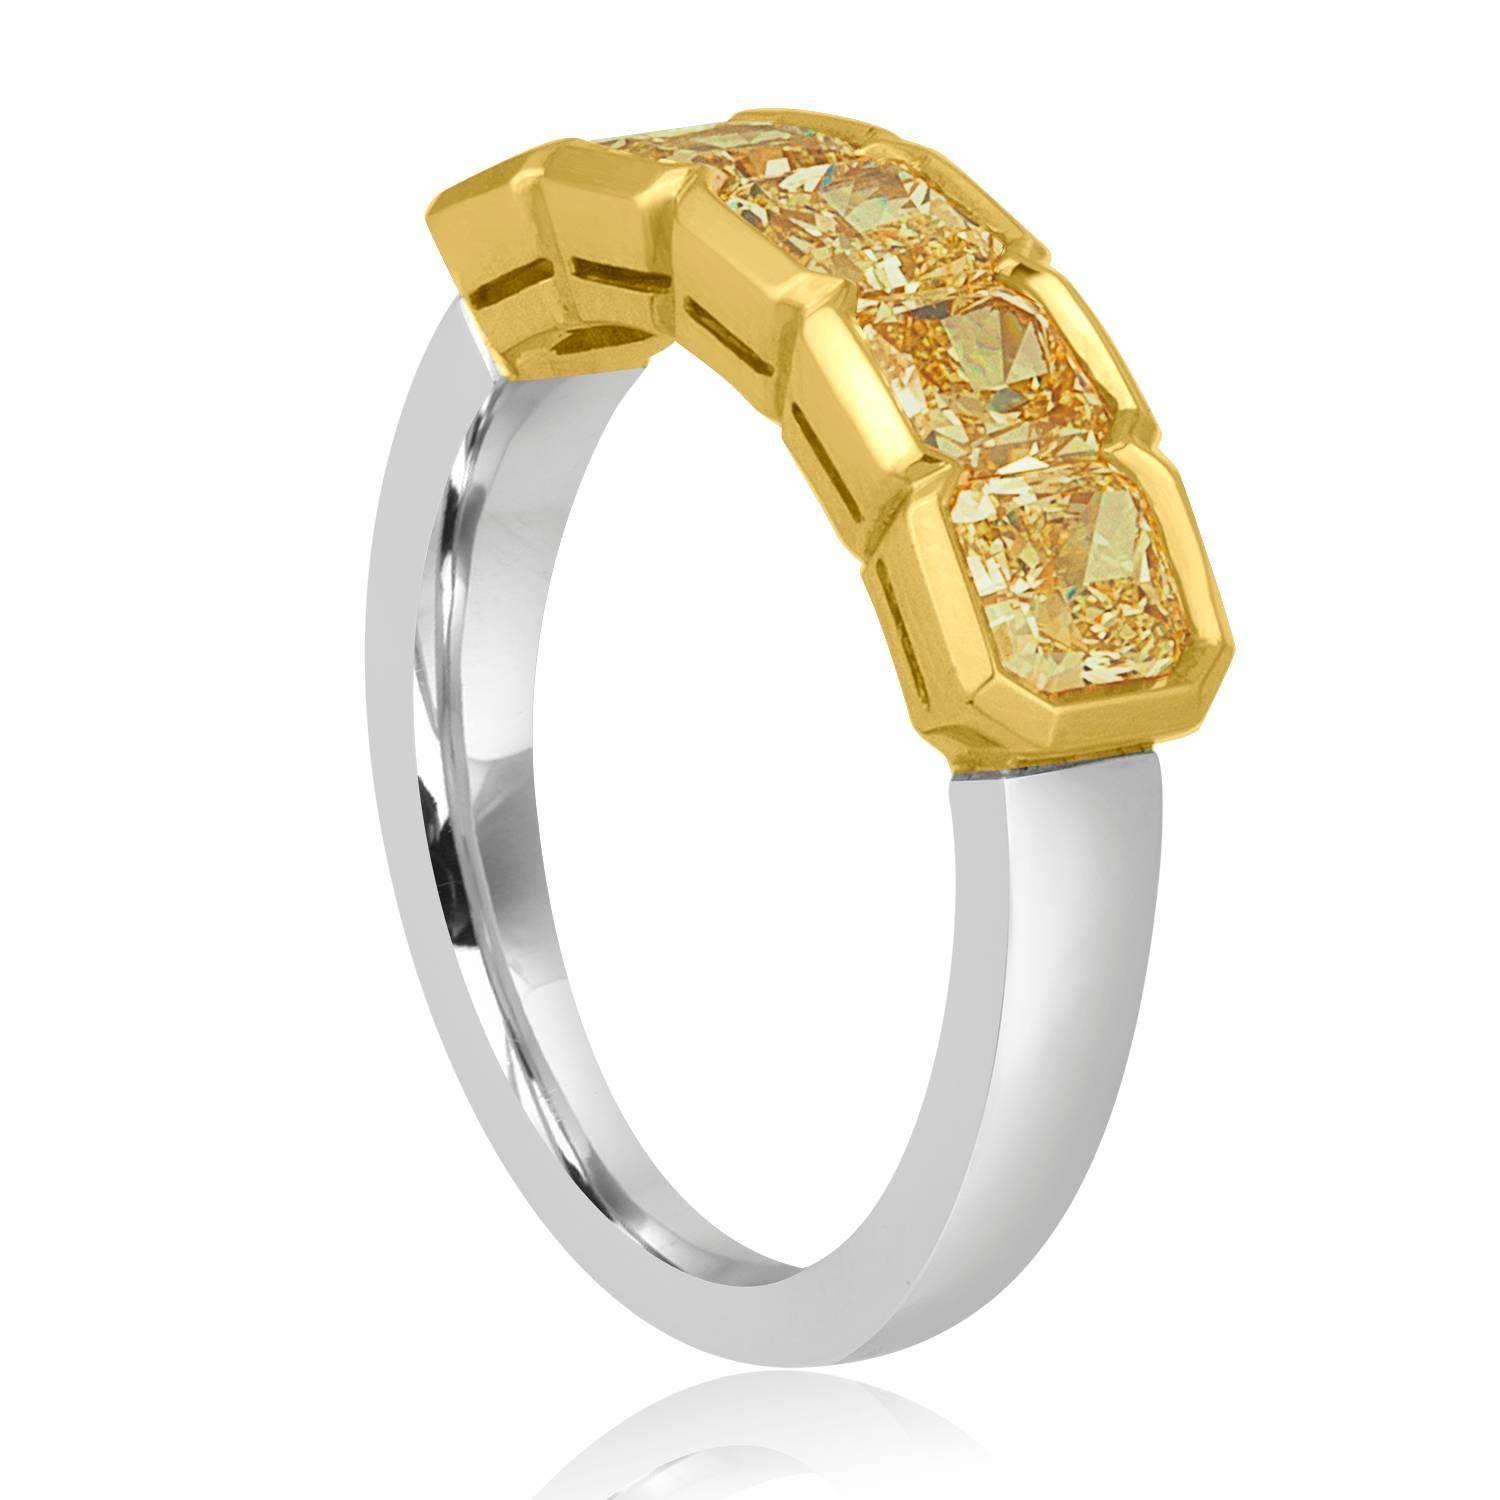 Very Beautiful Half Diamond Band Ring
The ring is 18K Yellow Gold & PLT 950
There are 5 Radiant Cut Fancy Yellow Diamonds set in Bezel.
There are 1.83 Carats In Diamonds VS
The ring is a size 5.25, sizable.
The band is 5.7 mm wide.
The ring